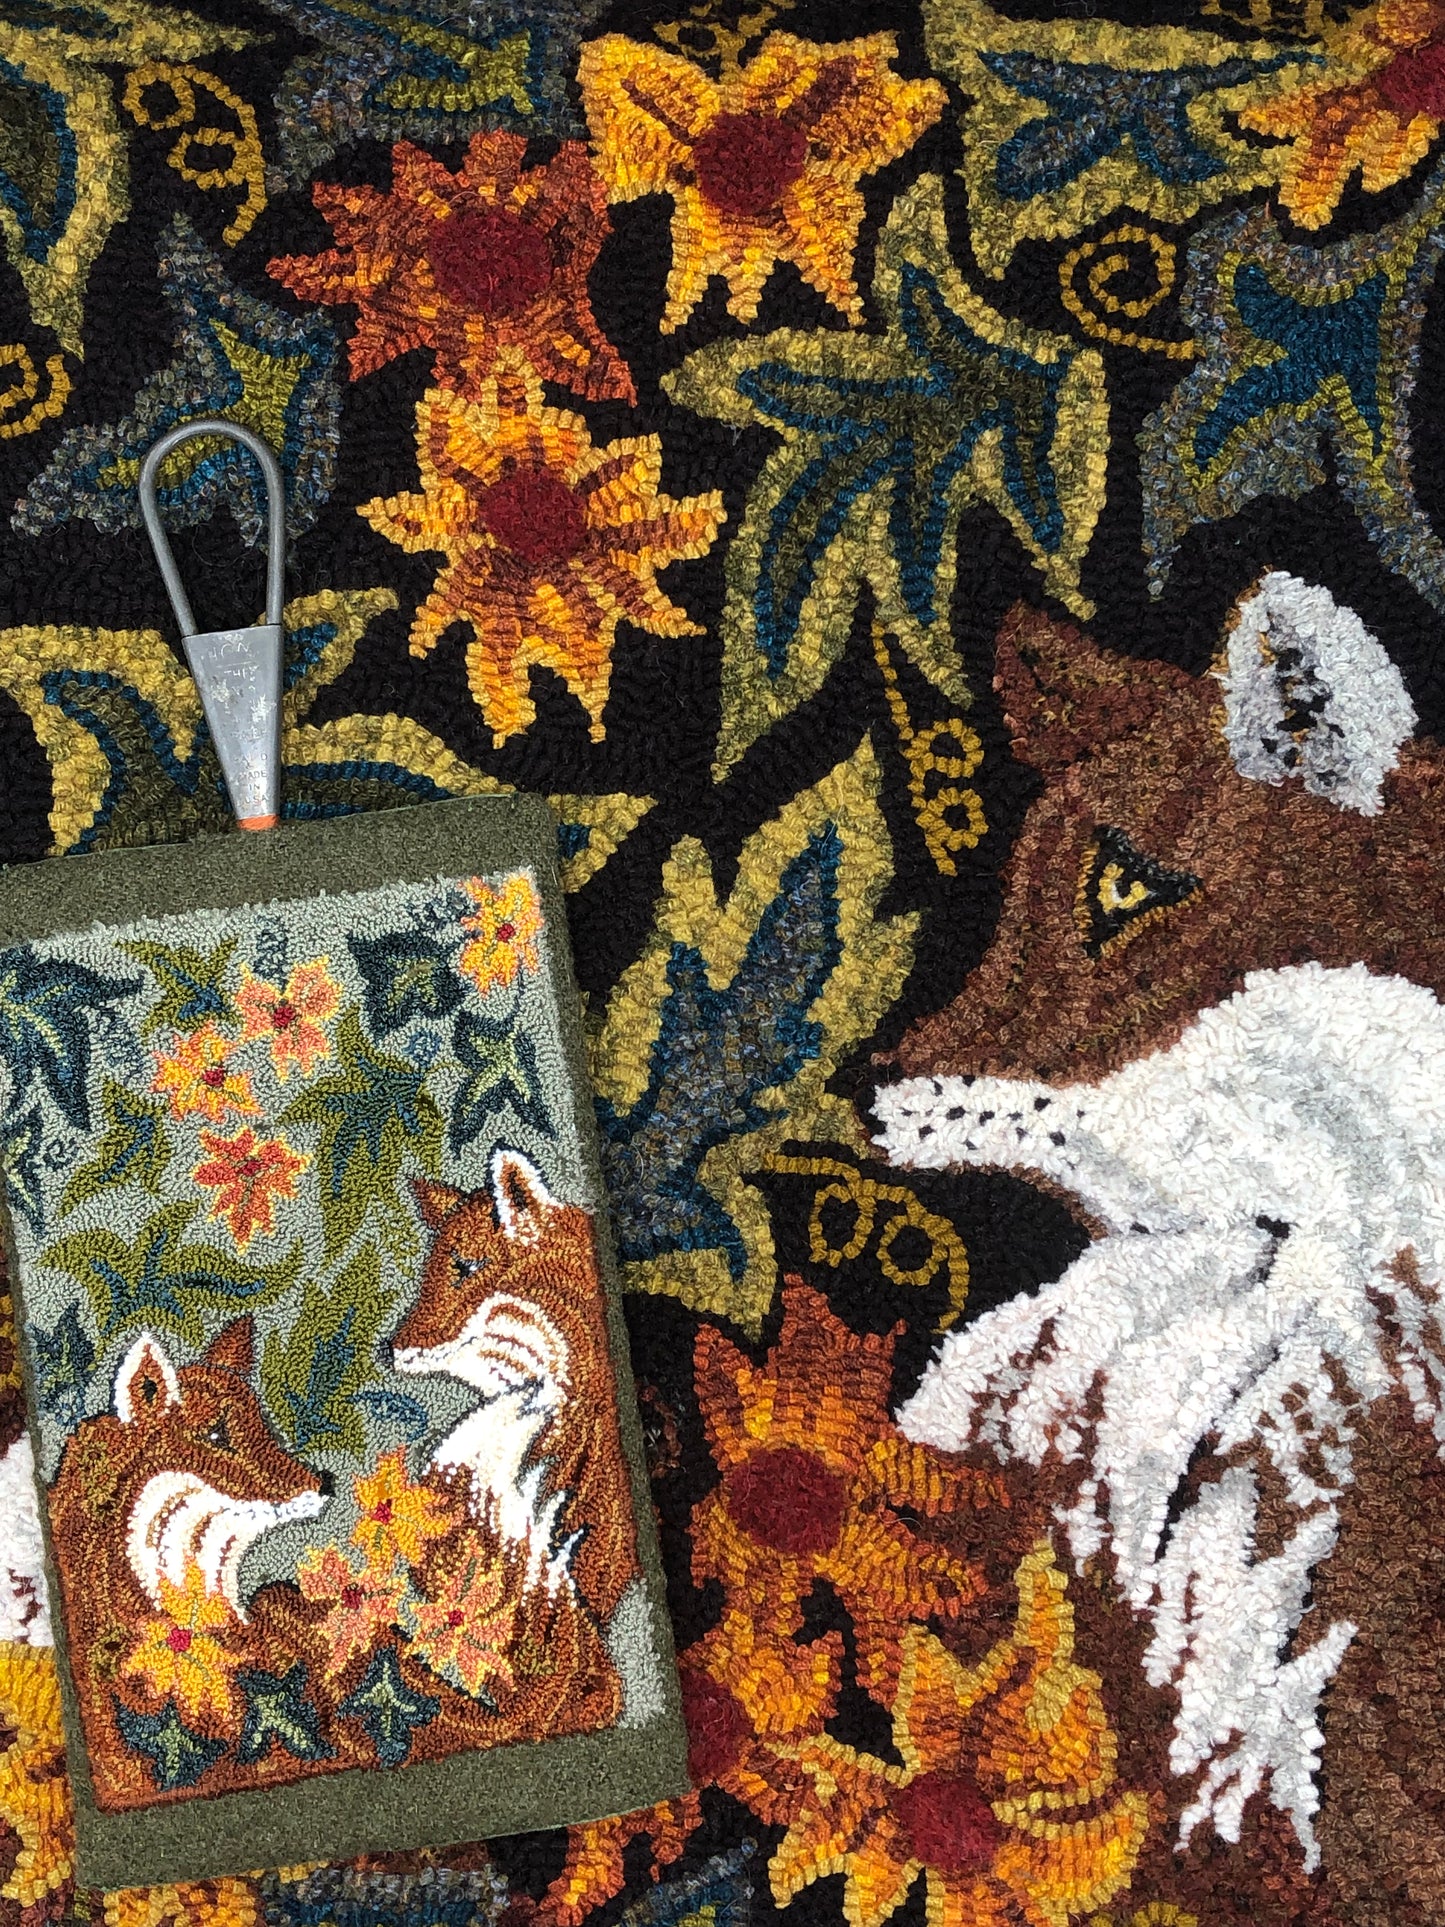 Together -PDF Digital Download Punch Needle Pattern by Orphaned Wool. This sweet pattern of two foxes looking at each other lovingly is perfect for anyone that enjoy the beauty of a fox, This pattern includes all the color codes needed to recreate this exact design,